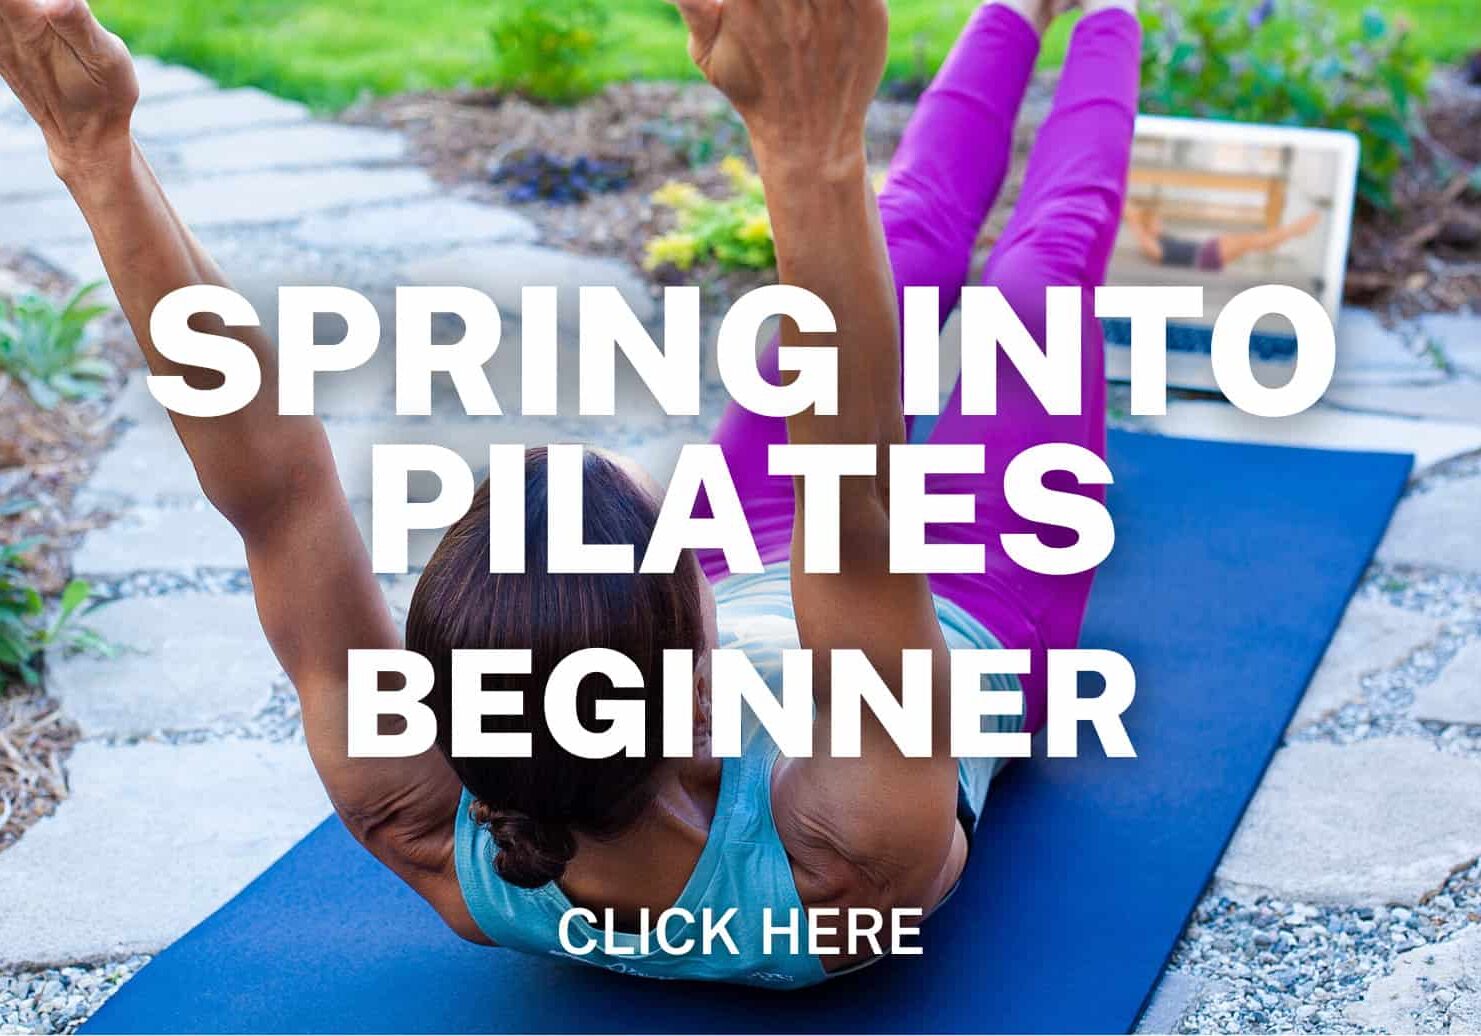 Click here for Spring Into Pilates 7 Day Plan - Beginner